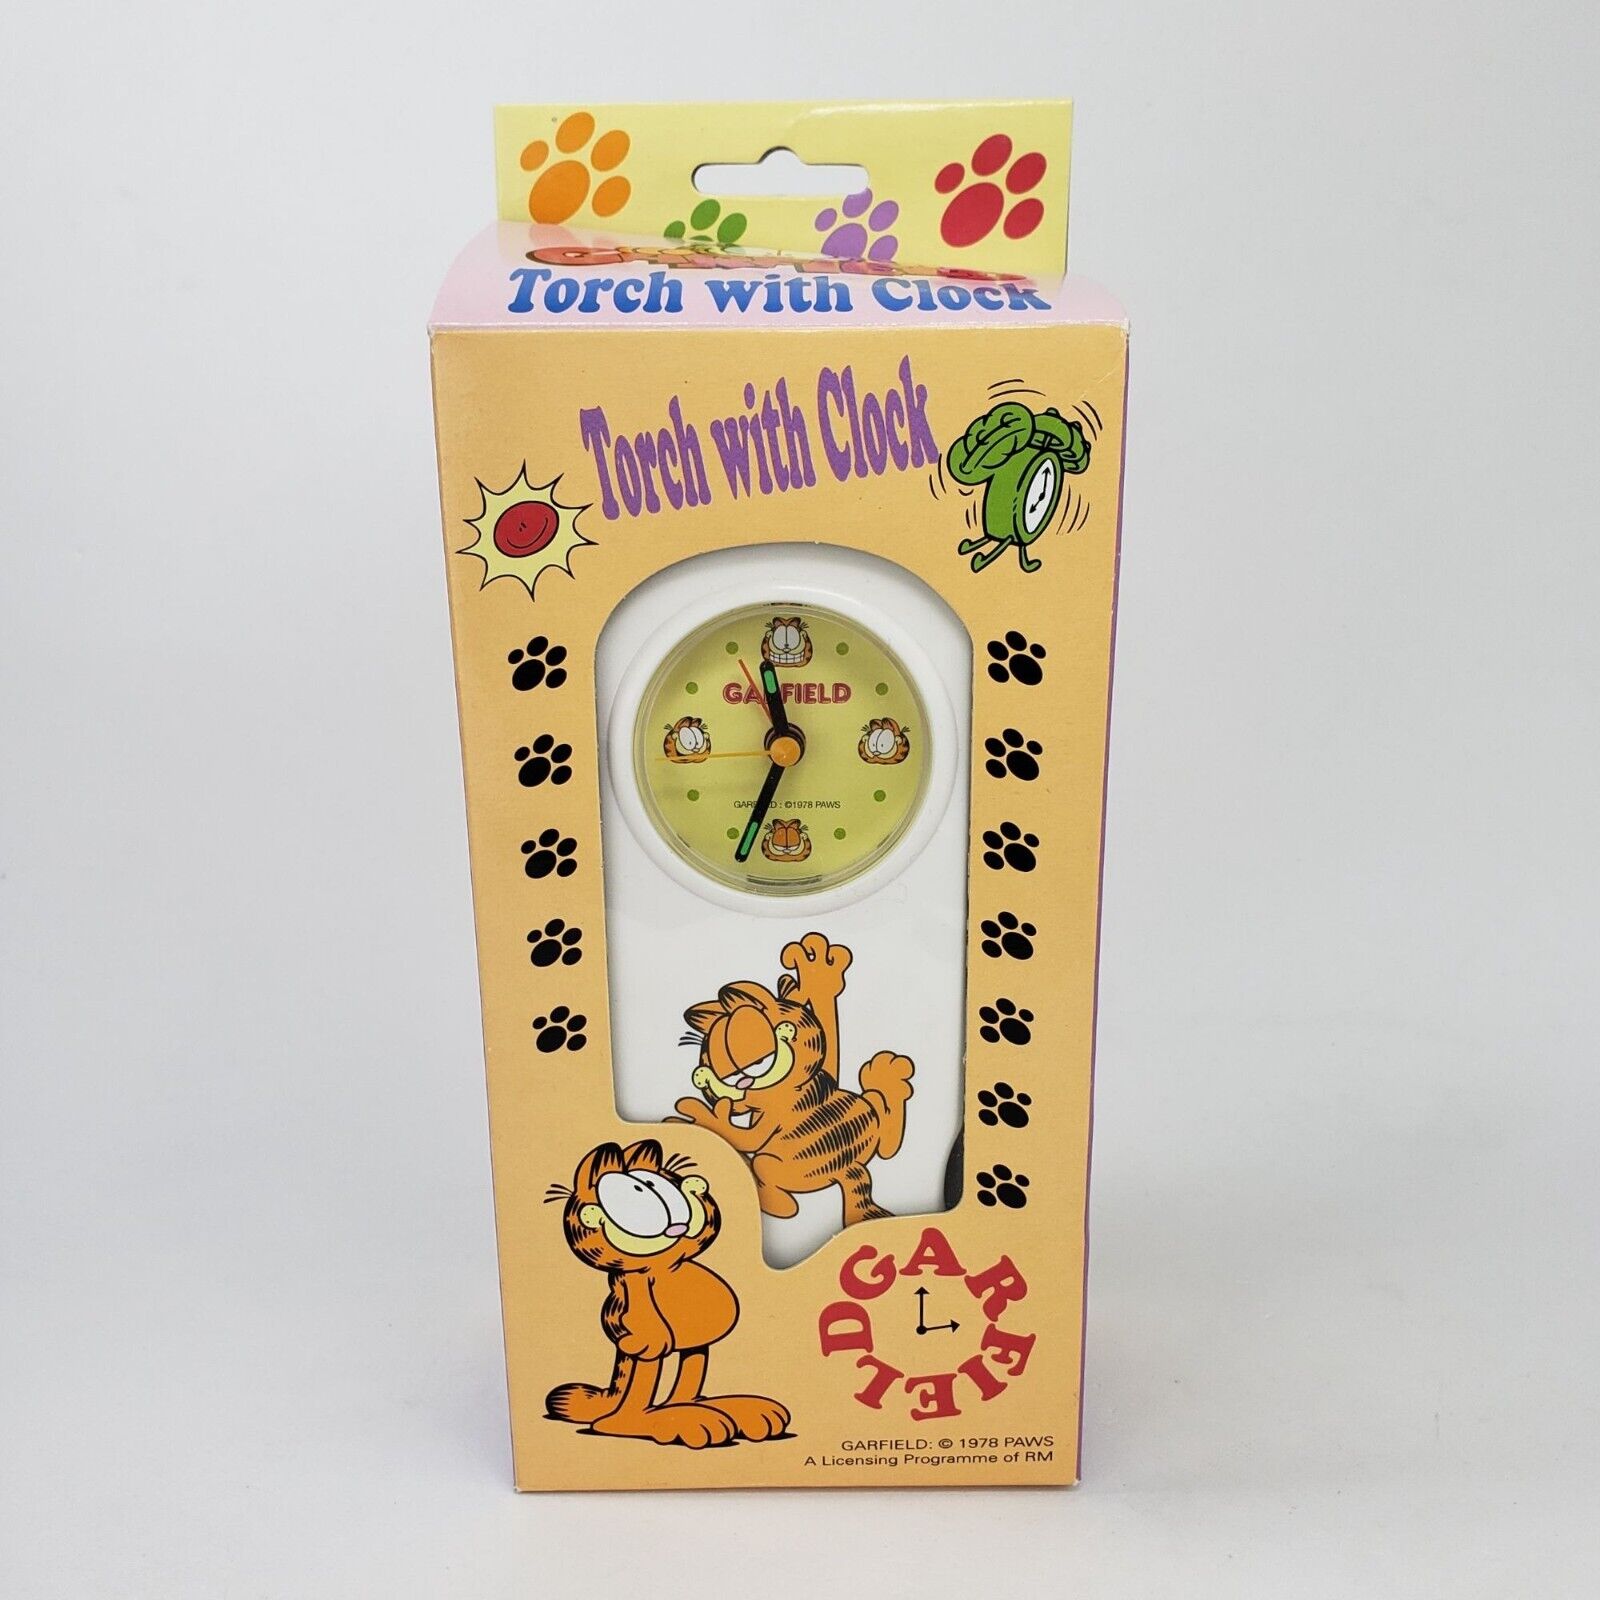 Rare Vintage 1978 PAWS GARFIELD The Cat Torch with Clock NOS Flashlight Boxed